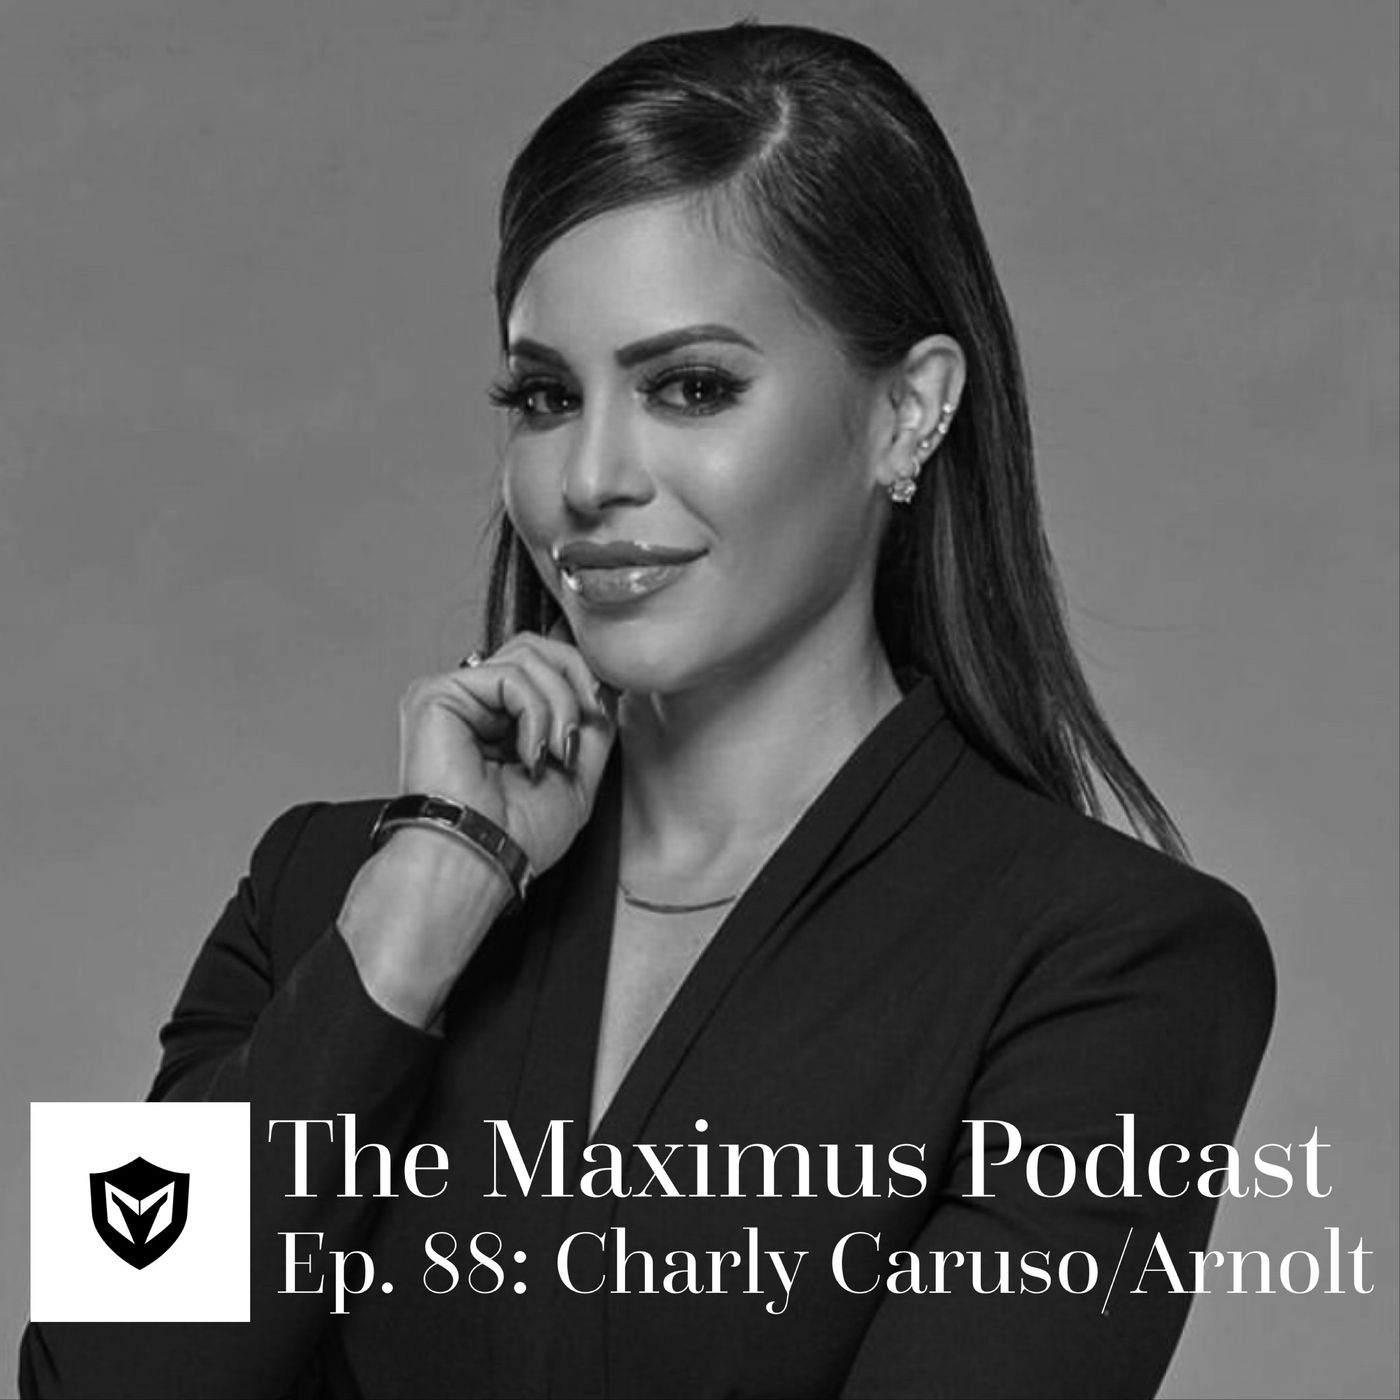 The Maximus Podcast Ep. 88 - Charly Arnolt a.k.a. Charly Caruso